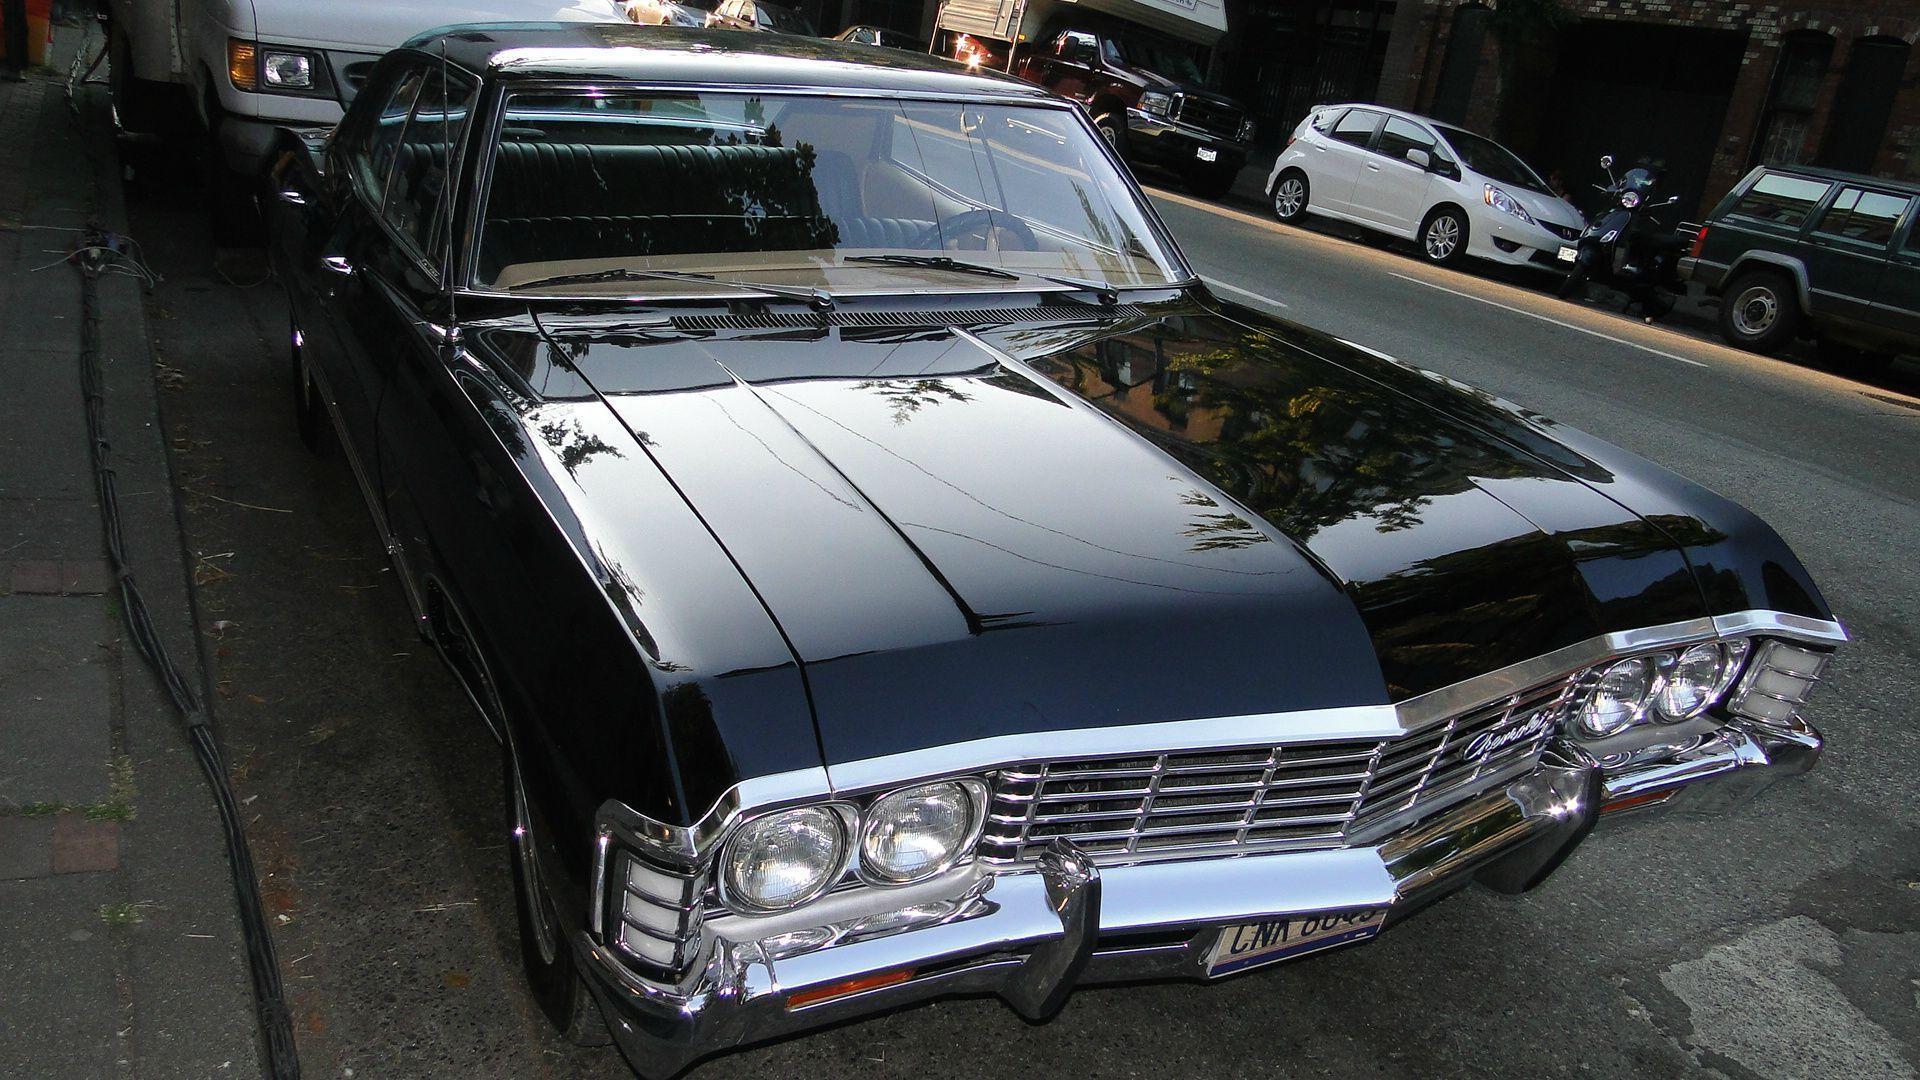 image about &;67 Chevy Impala. Cars, Dean o